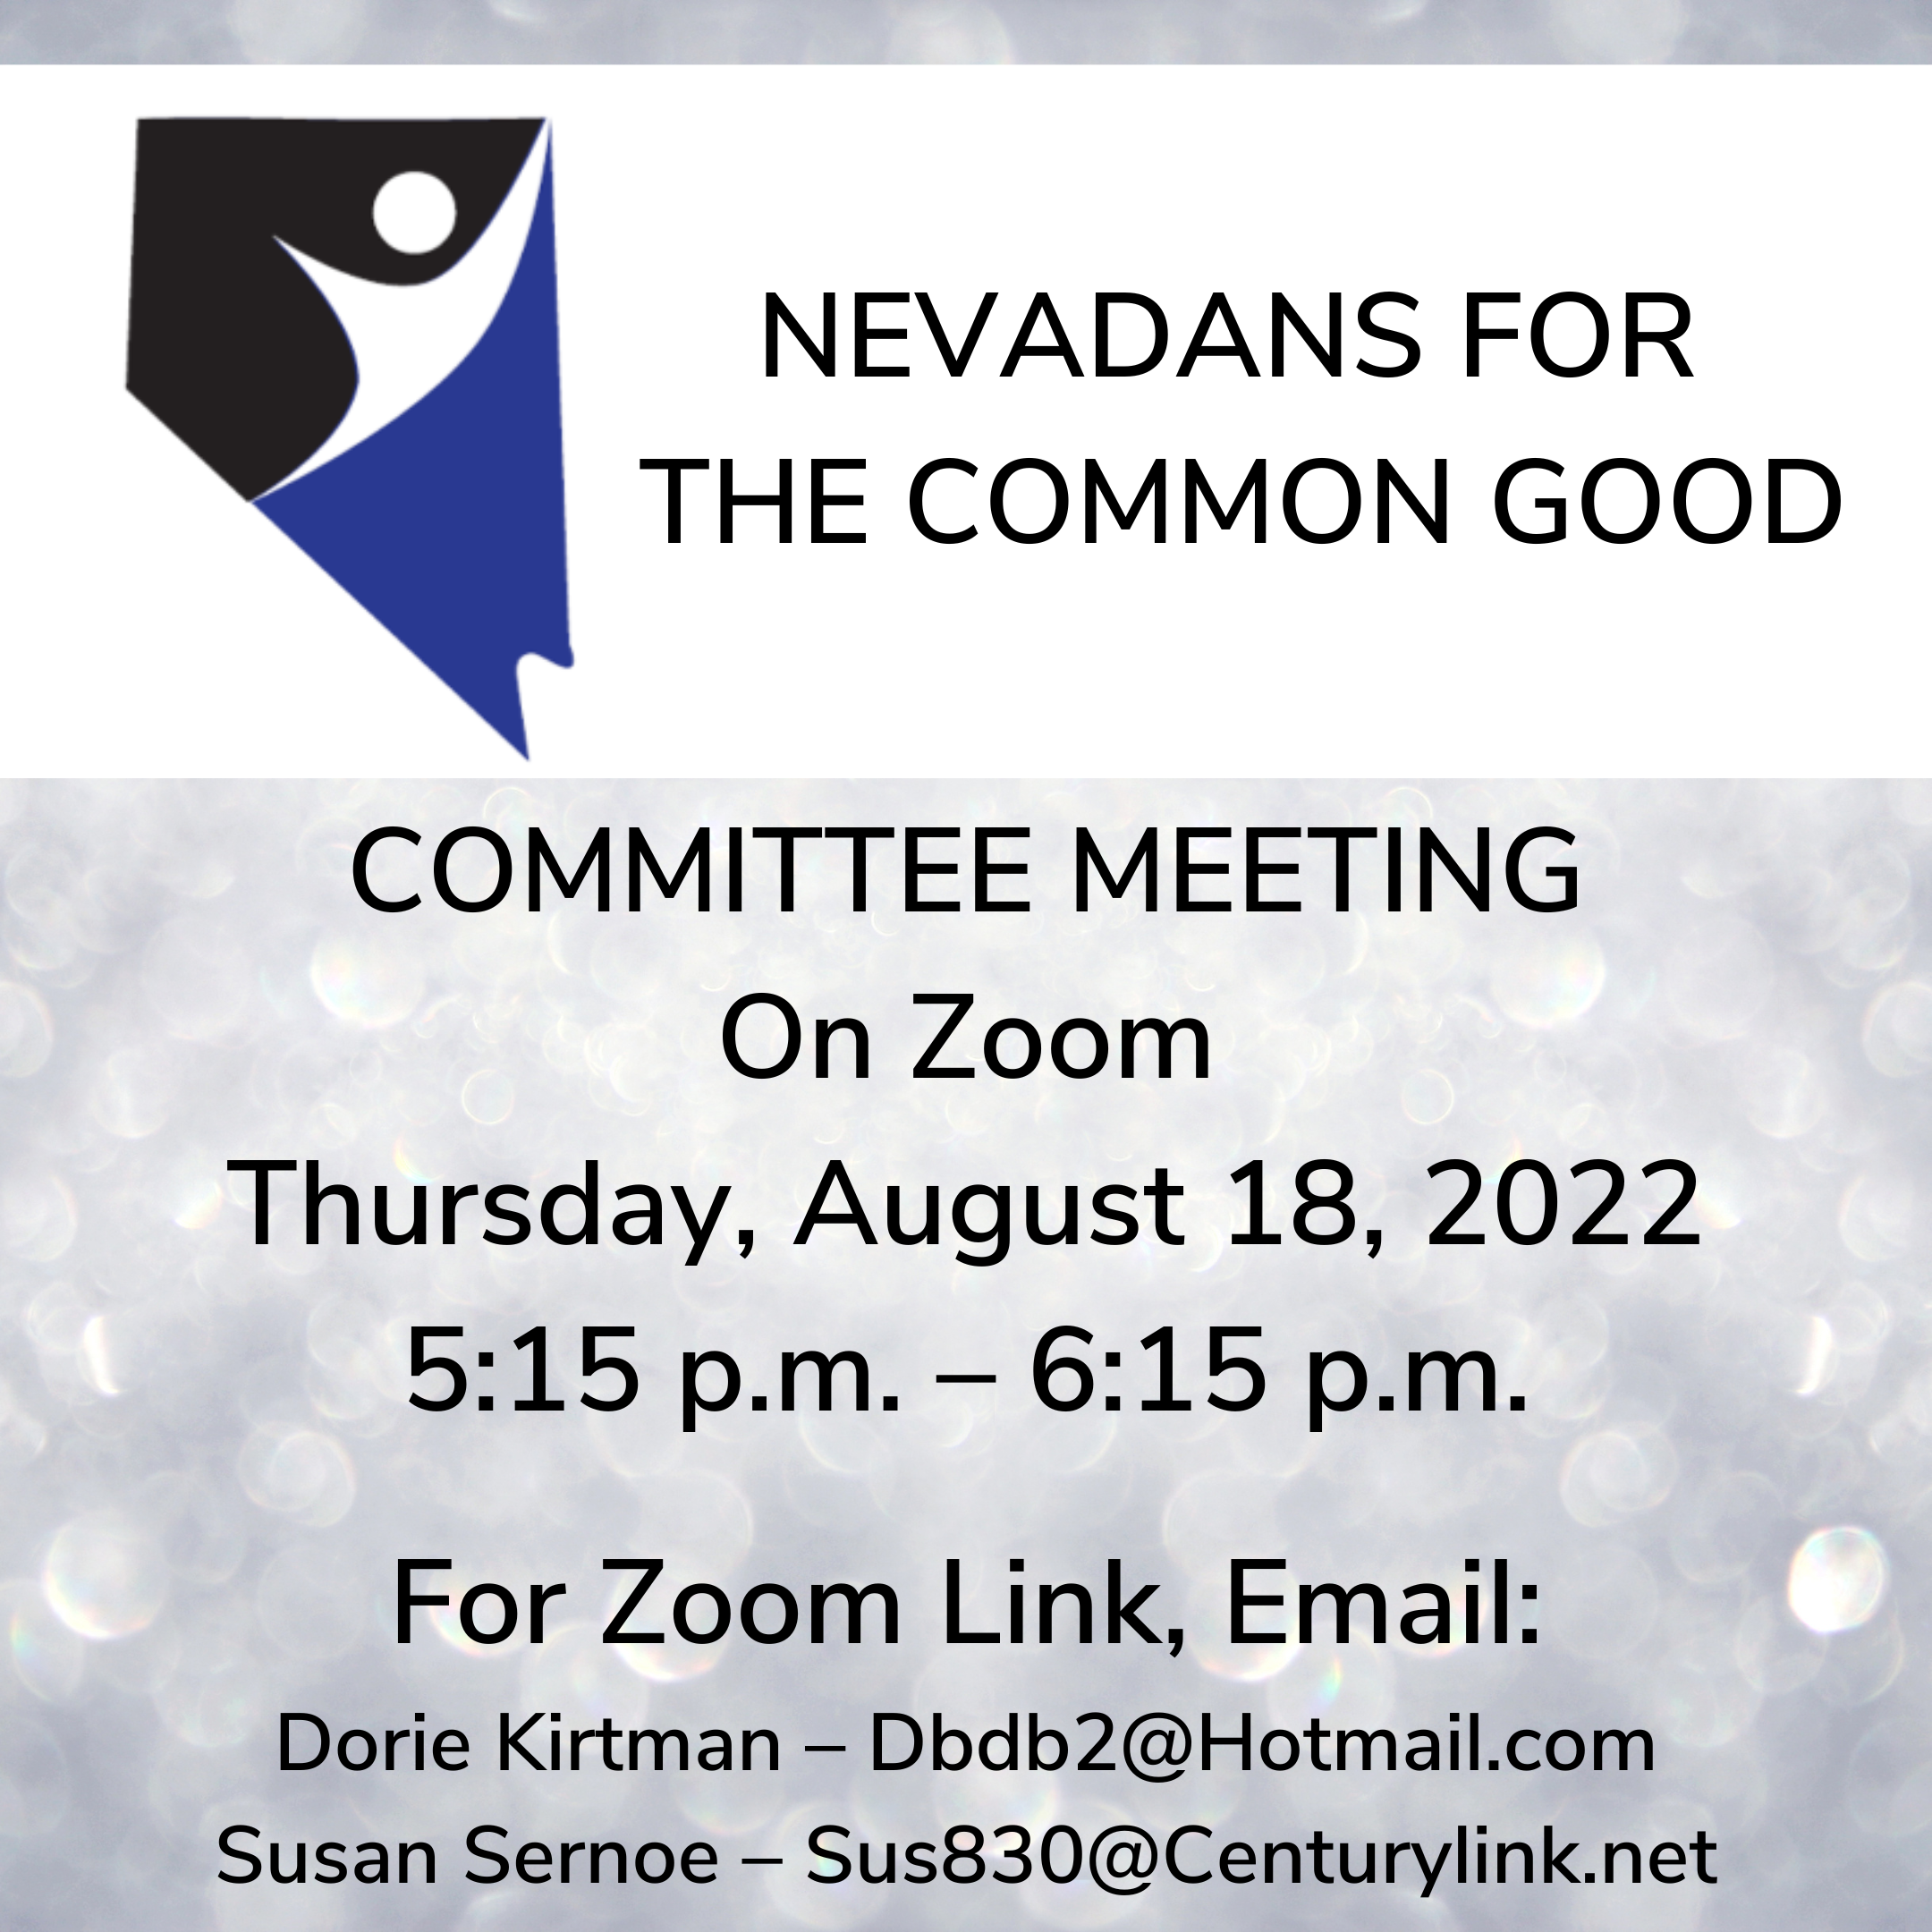 NEVADANS FOR THE COMMON GOOD COMMITTEE MEETING